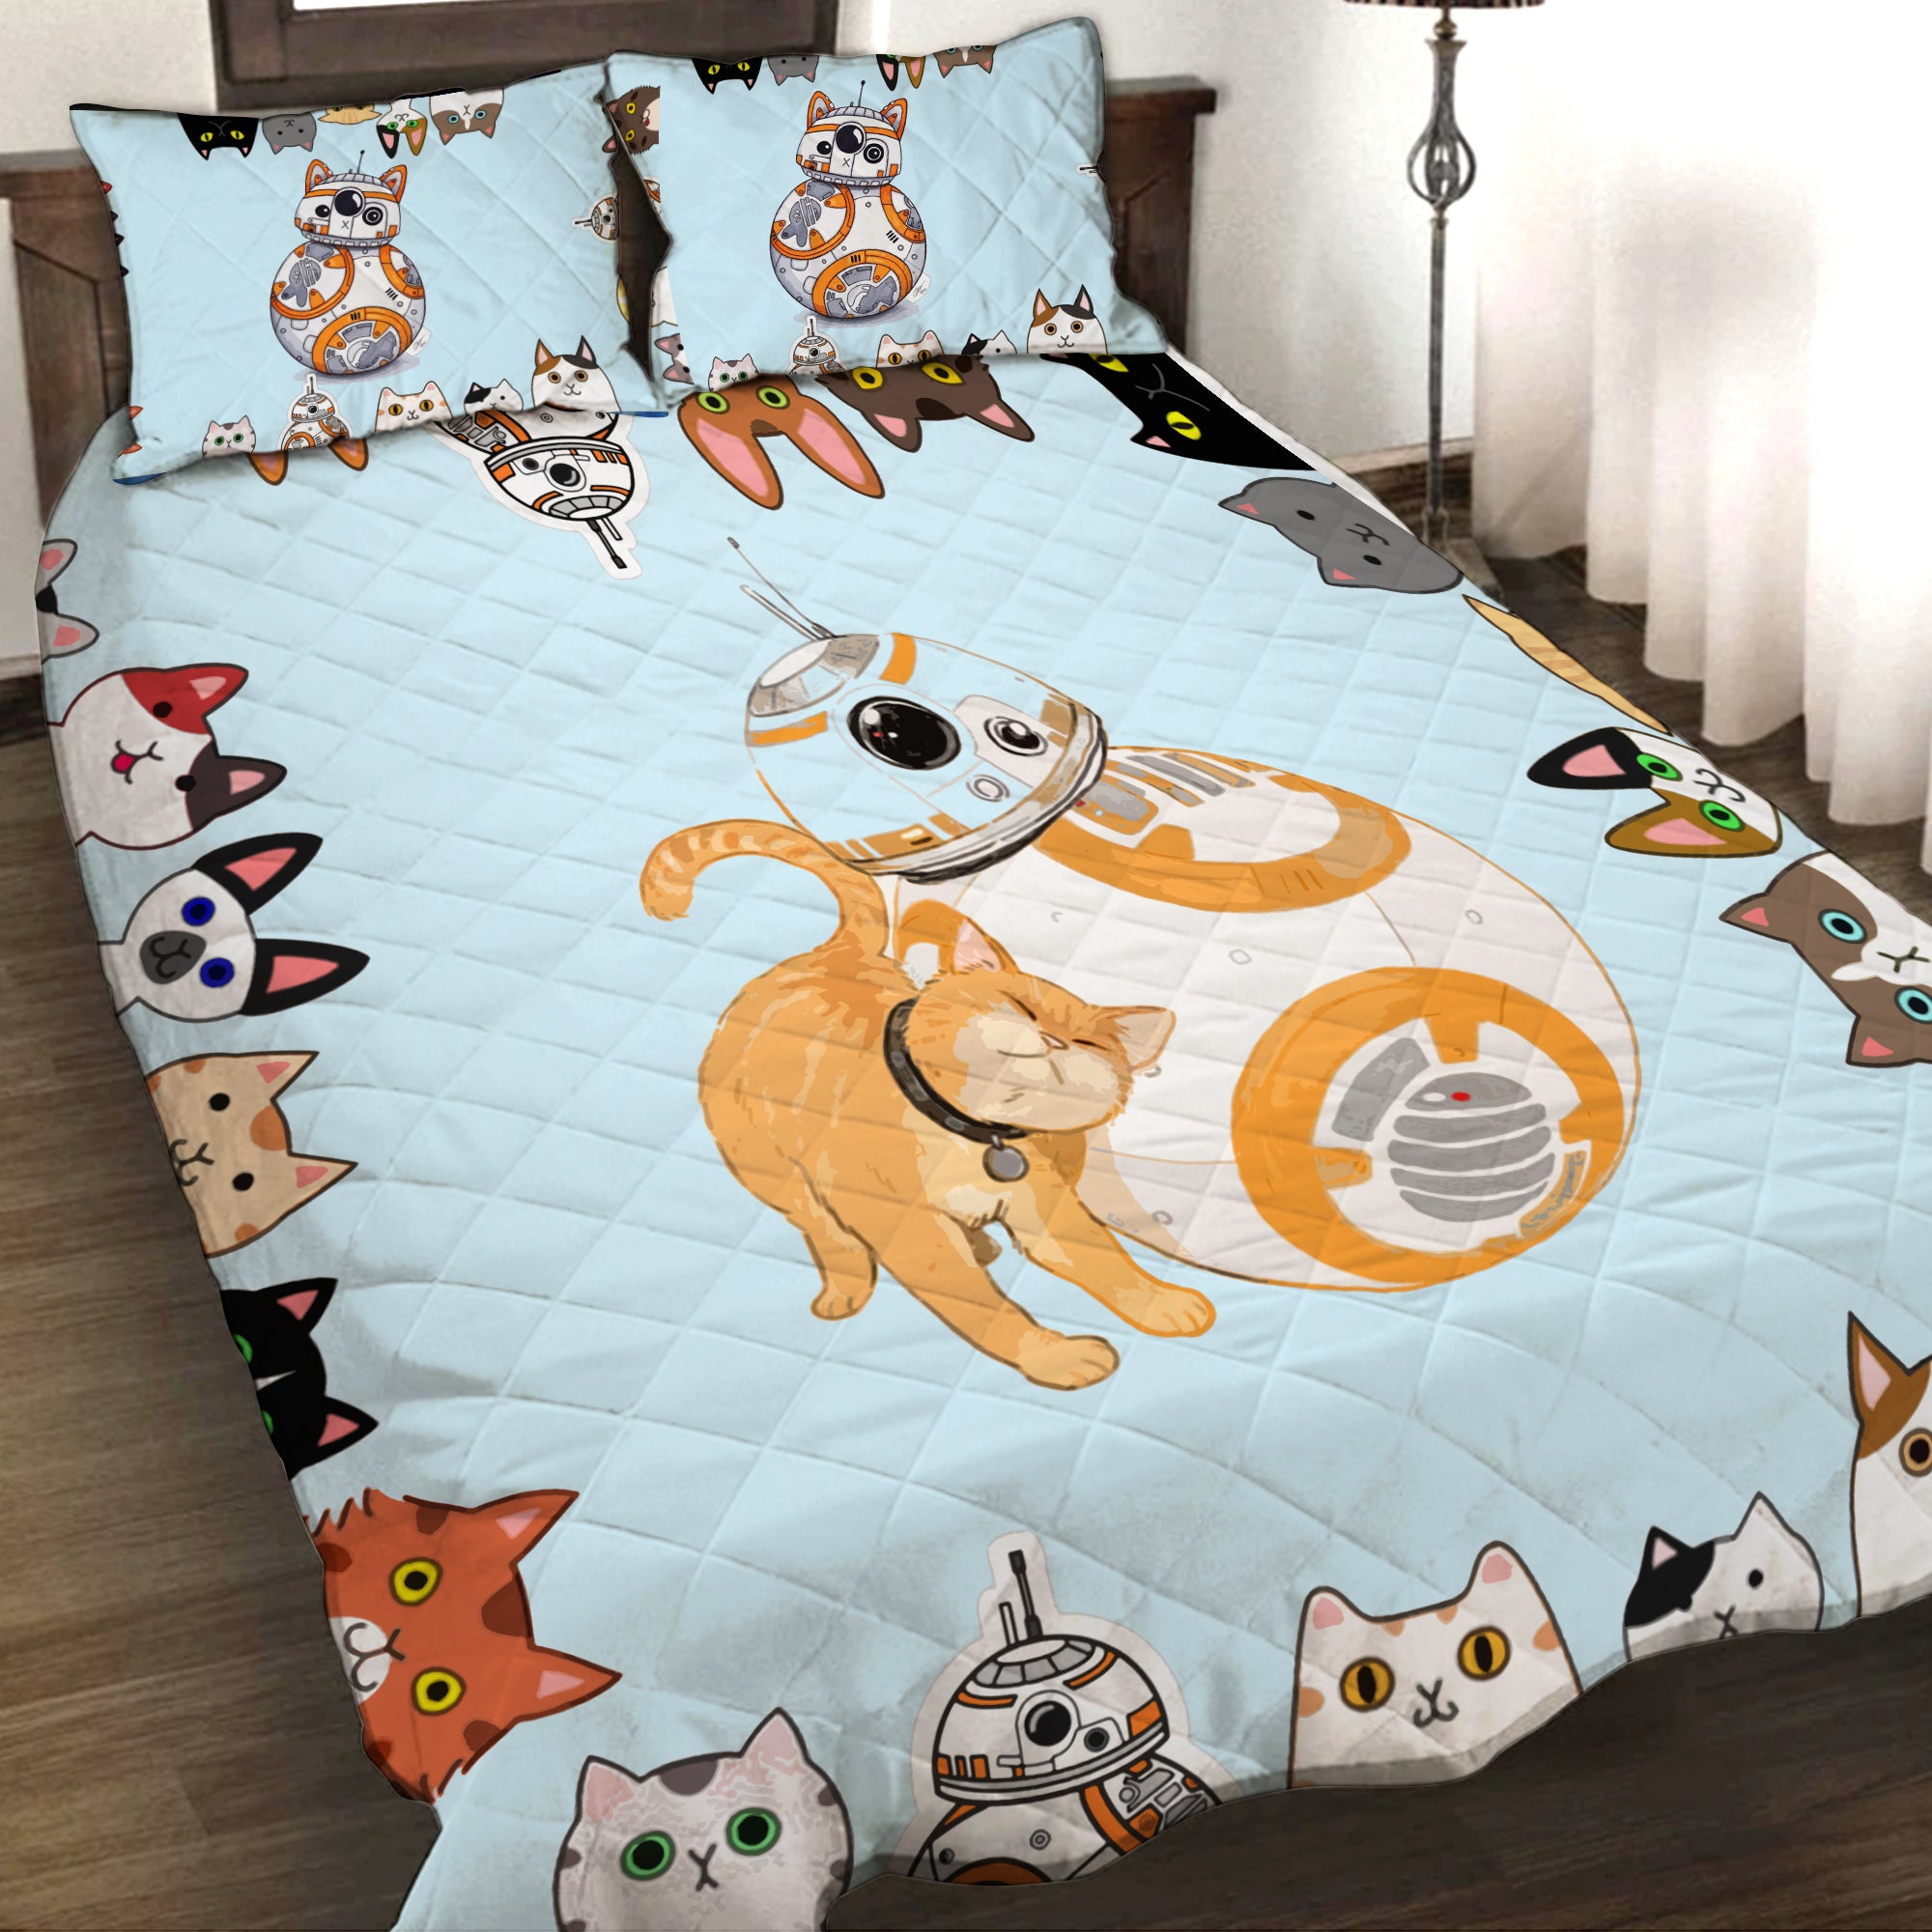 Star wars and cats 3D Quilt Set